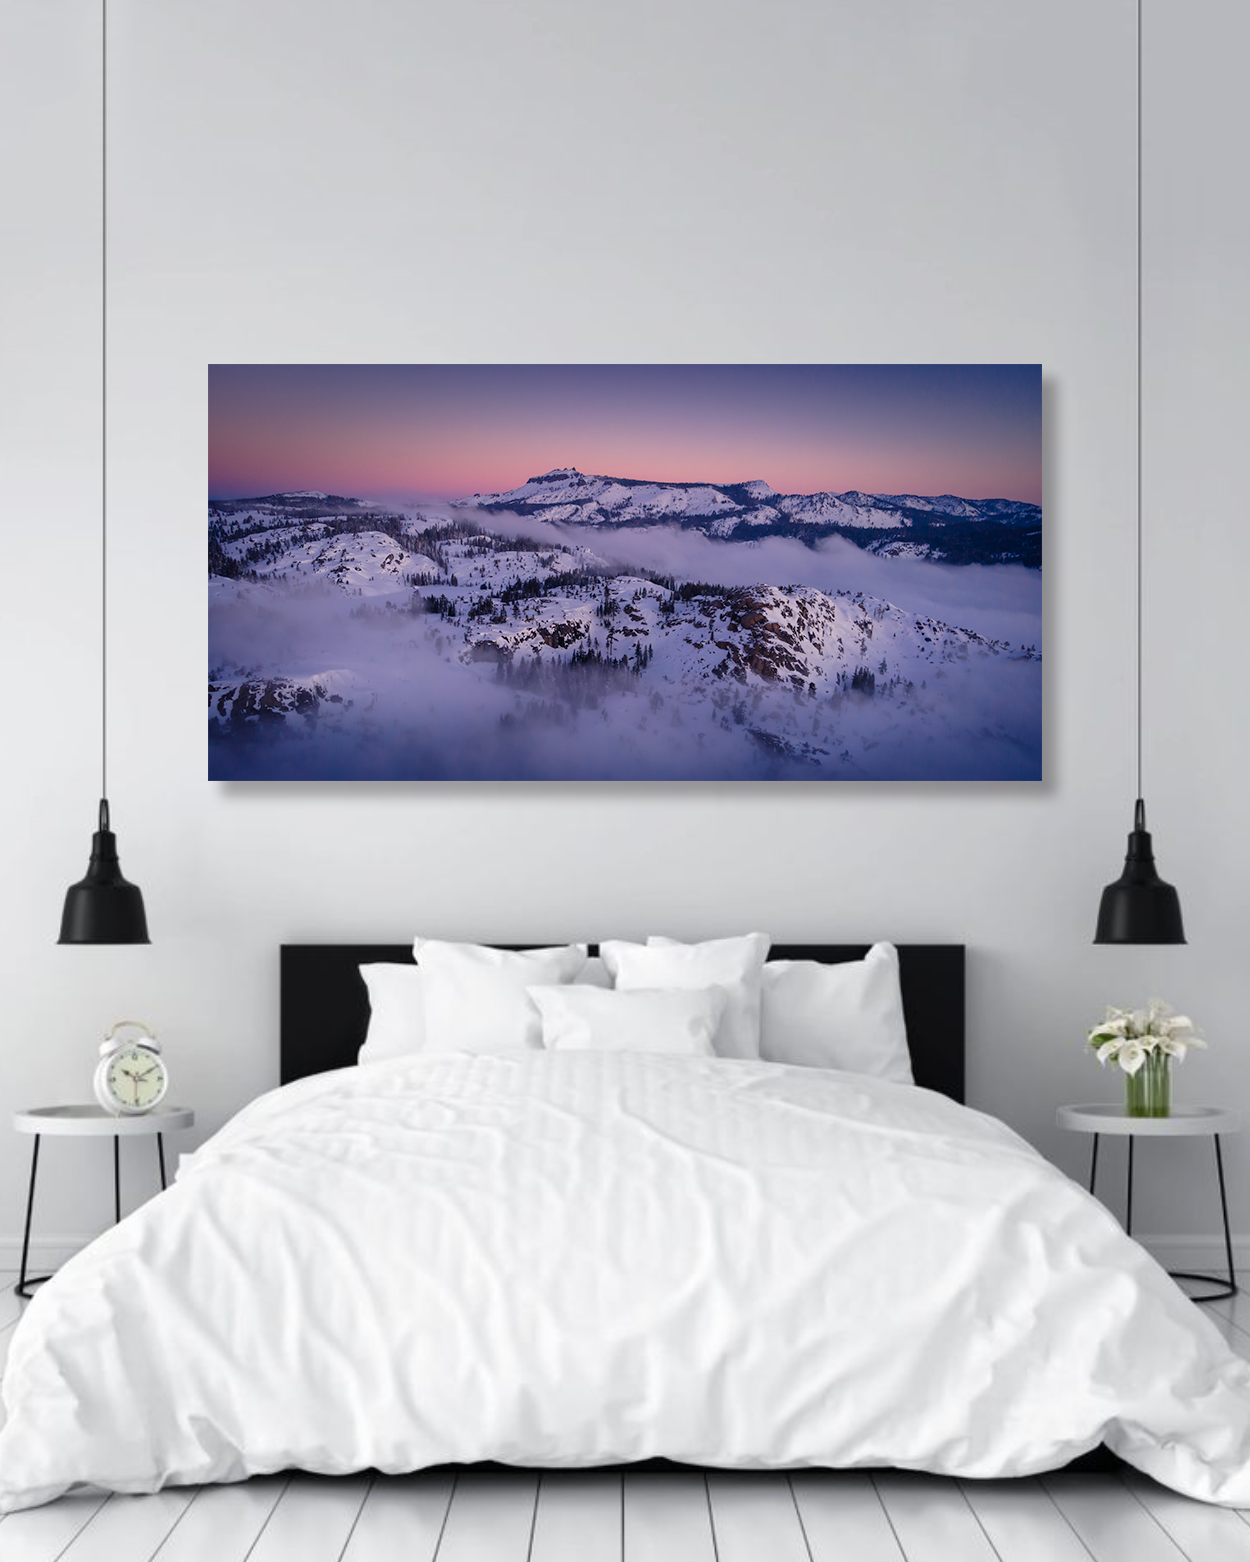 A bedroom wall is decorated with a fine art photograph showcasing snowy mountains under a pink sunset.